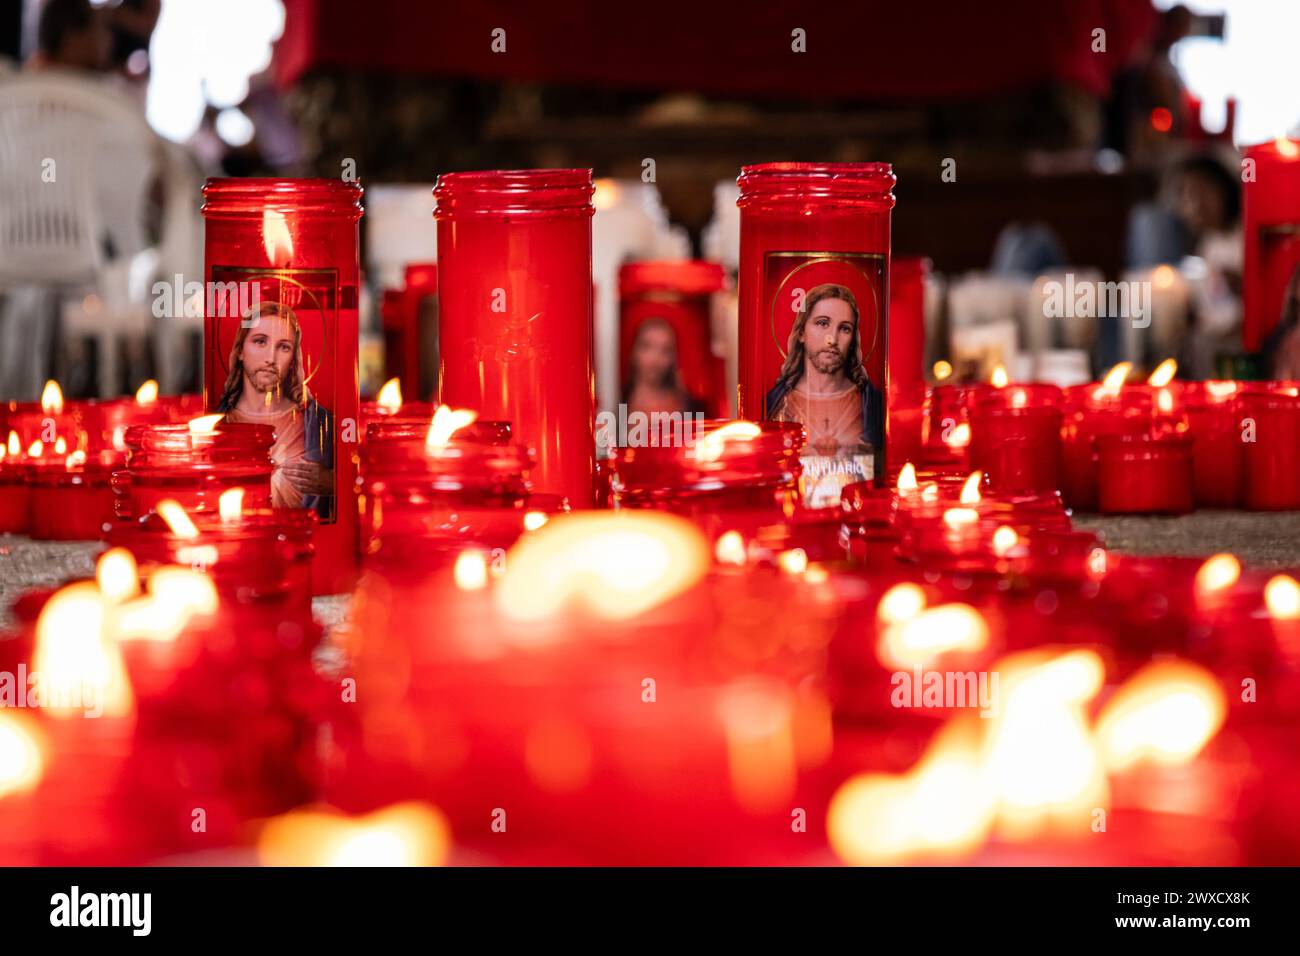 Medellin, Colombia. 29th Mar, 2024. People take part during the Good Friday procession in Copacabana northern of Medellin, Colombia as part of the Holy Week celebrations on March 29, 2024. On days prior to the good friday the 'Cross Sanctuary' suffered a forest fire on its sorroundings leaving marks that the people noticed during the procession. Photo by: Juan J. Eraso/Long Visual Press Credit: Long Visual Press/Alamy Live News Stock Photo